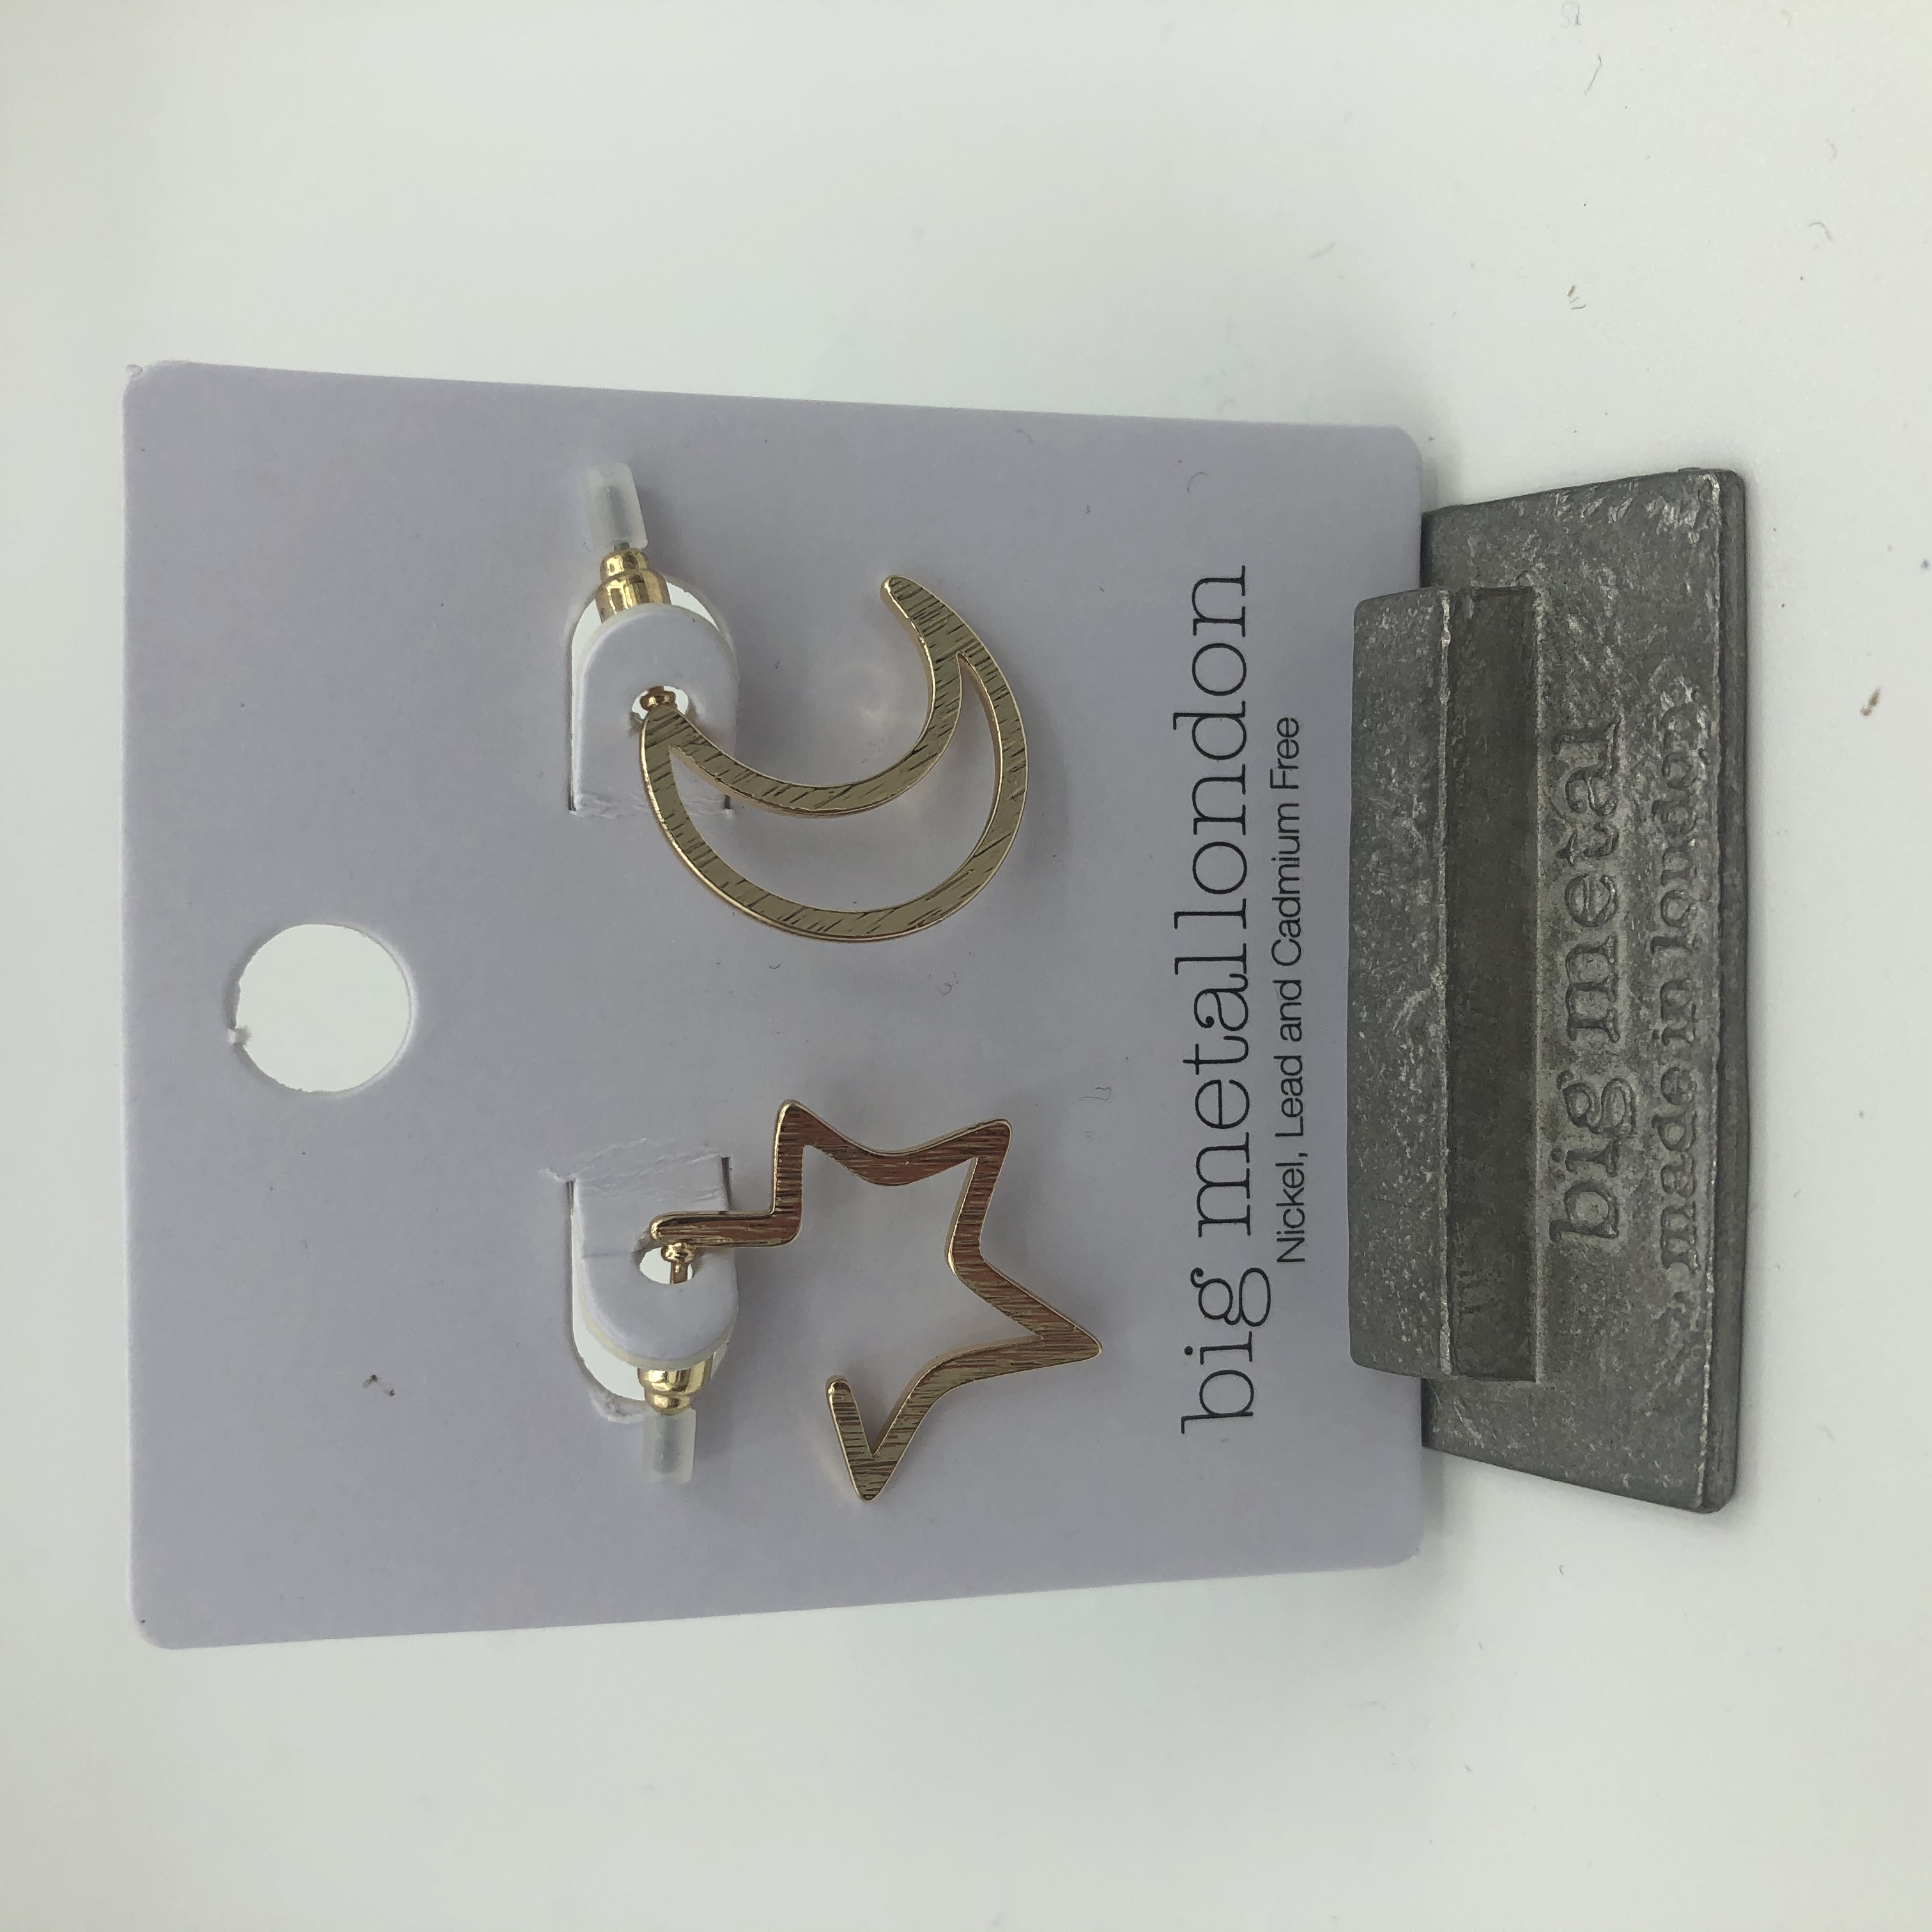 Big Metal Chiarra Mismatched Moon and Star Earrings Gold